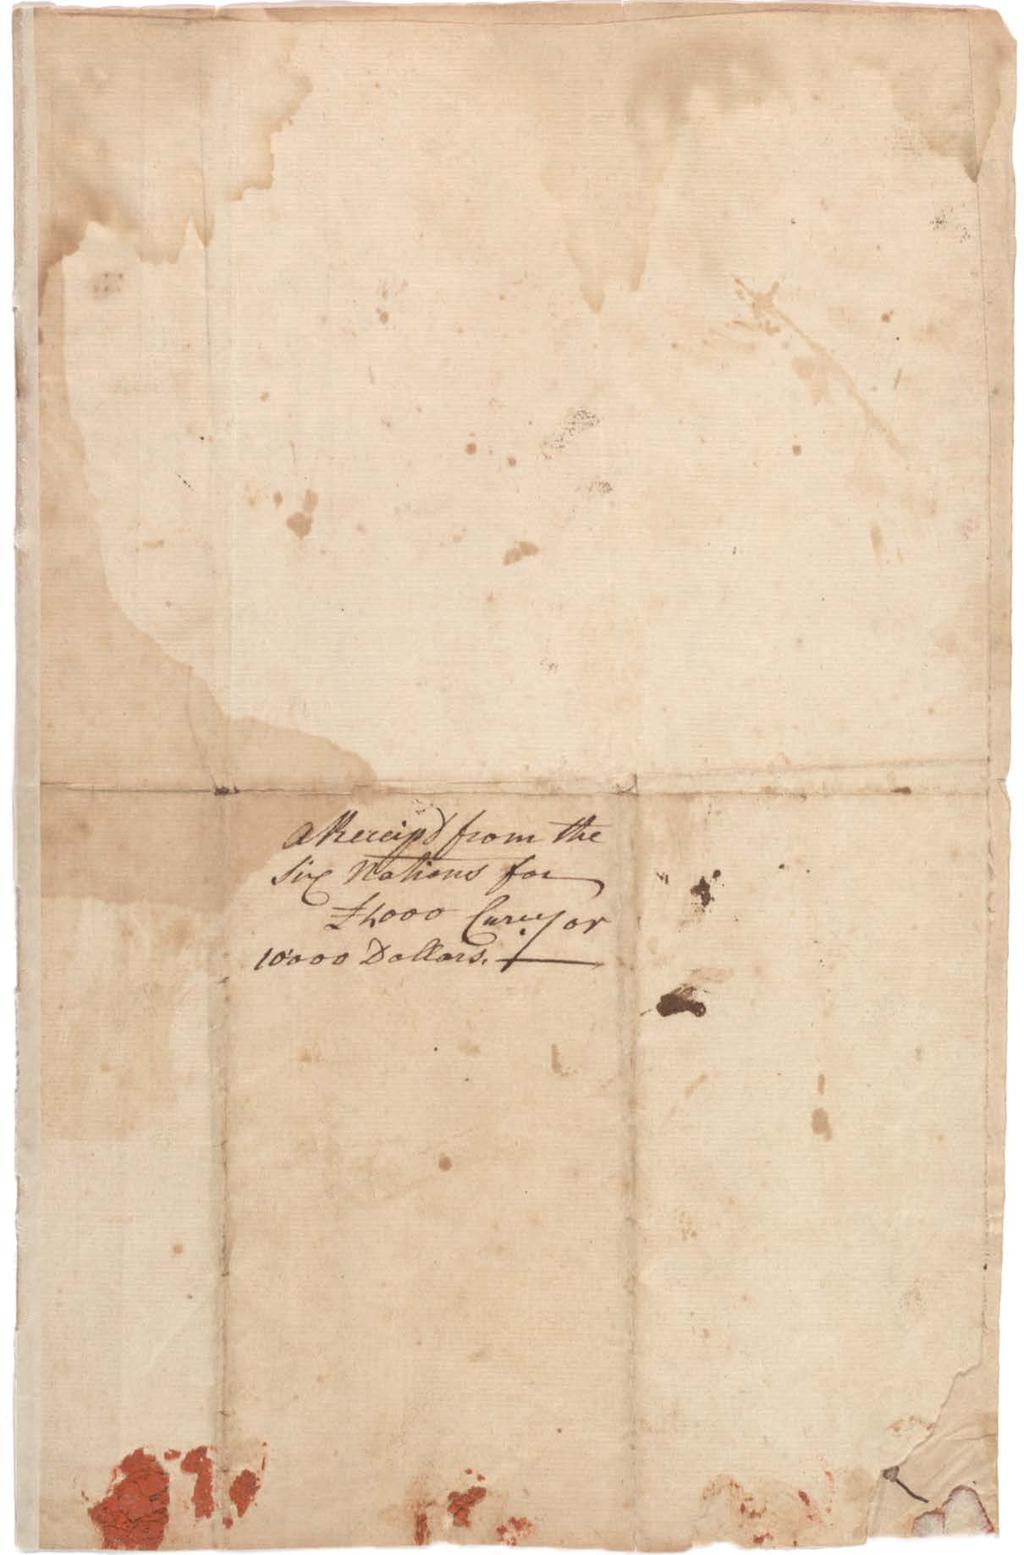 5 A receipt for land purchased from the Six Nations by